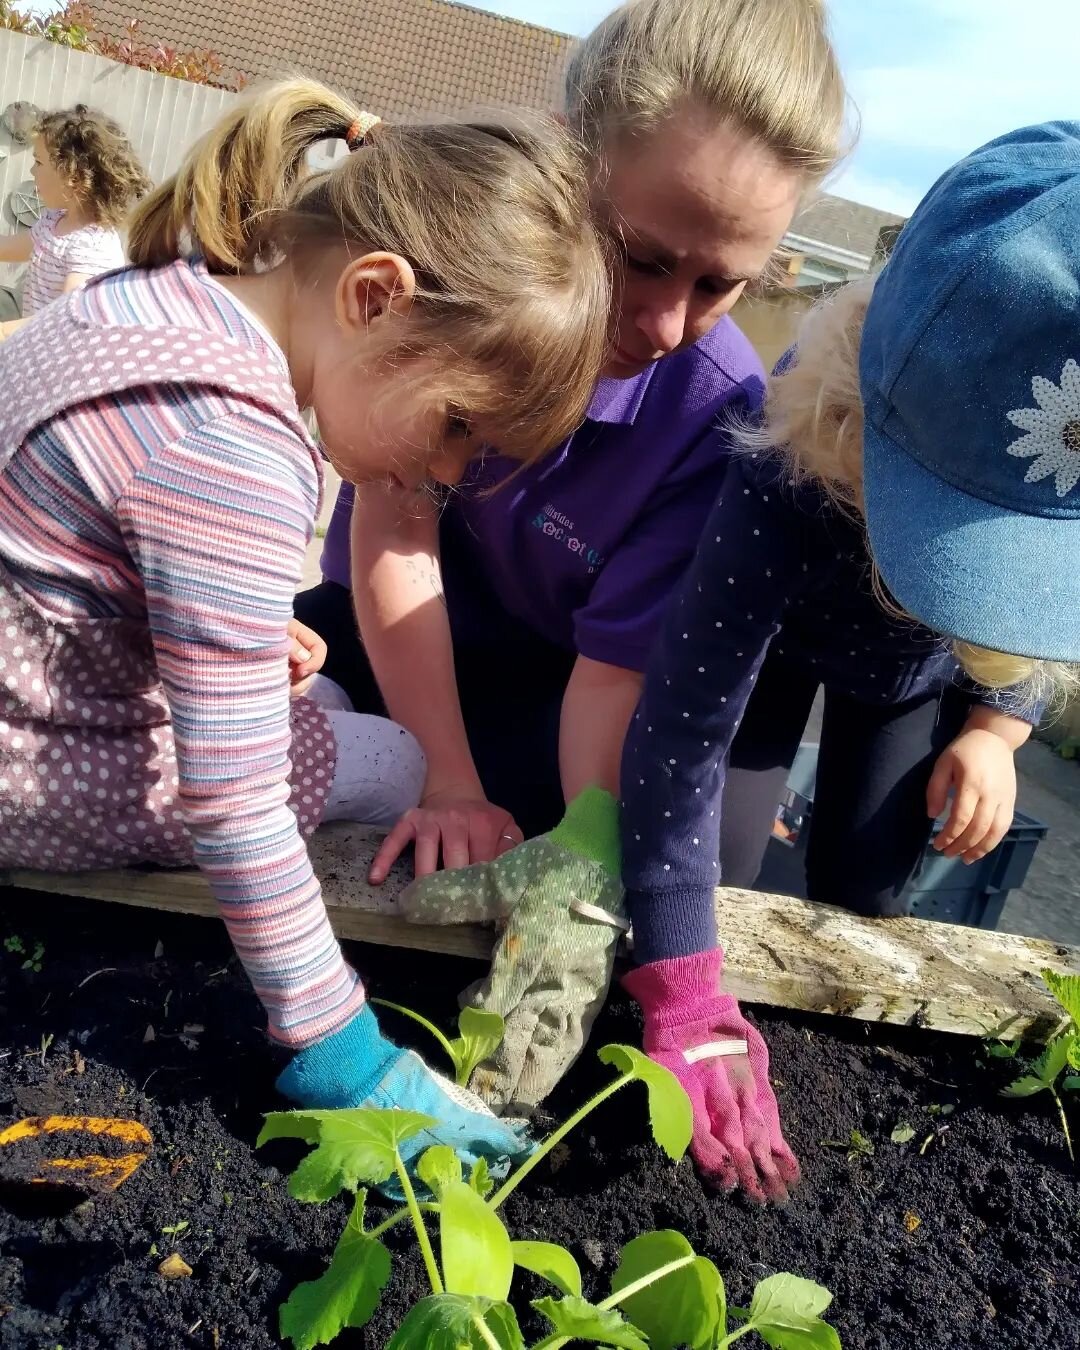 PLANTING VEGETABLES 🌽🧅🥕

The children have had a busy morning planting this year's vegetables in the vegetable patch. 

#plantingvegetables #vegetables #vegetablepatch #lifecycle #lifecycles #growth #growingvegetables #understandingtheworld #early